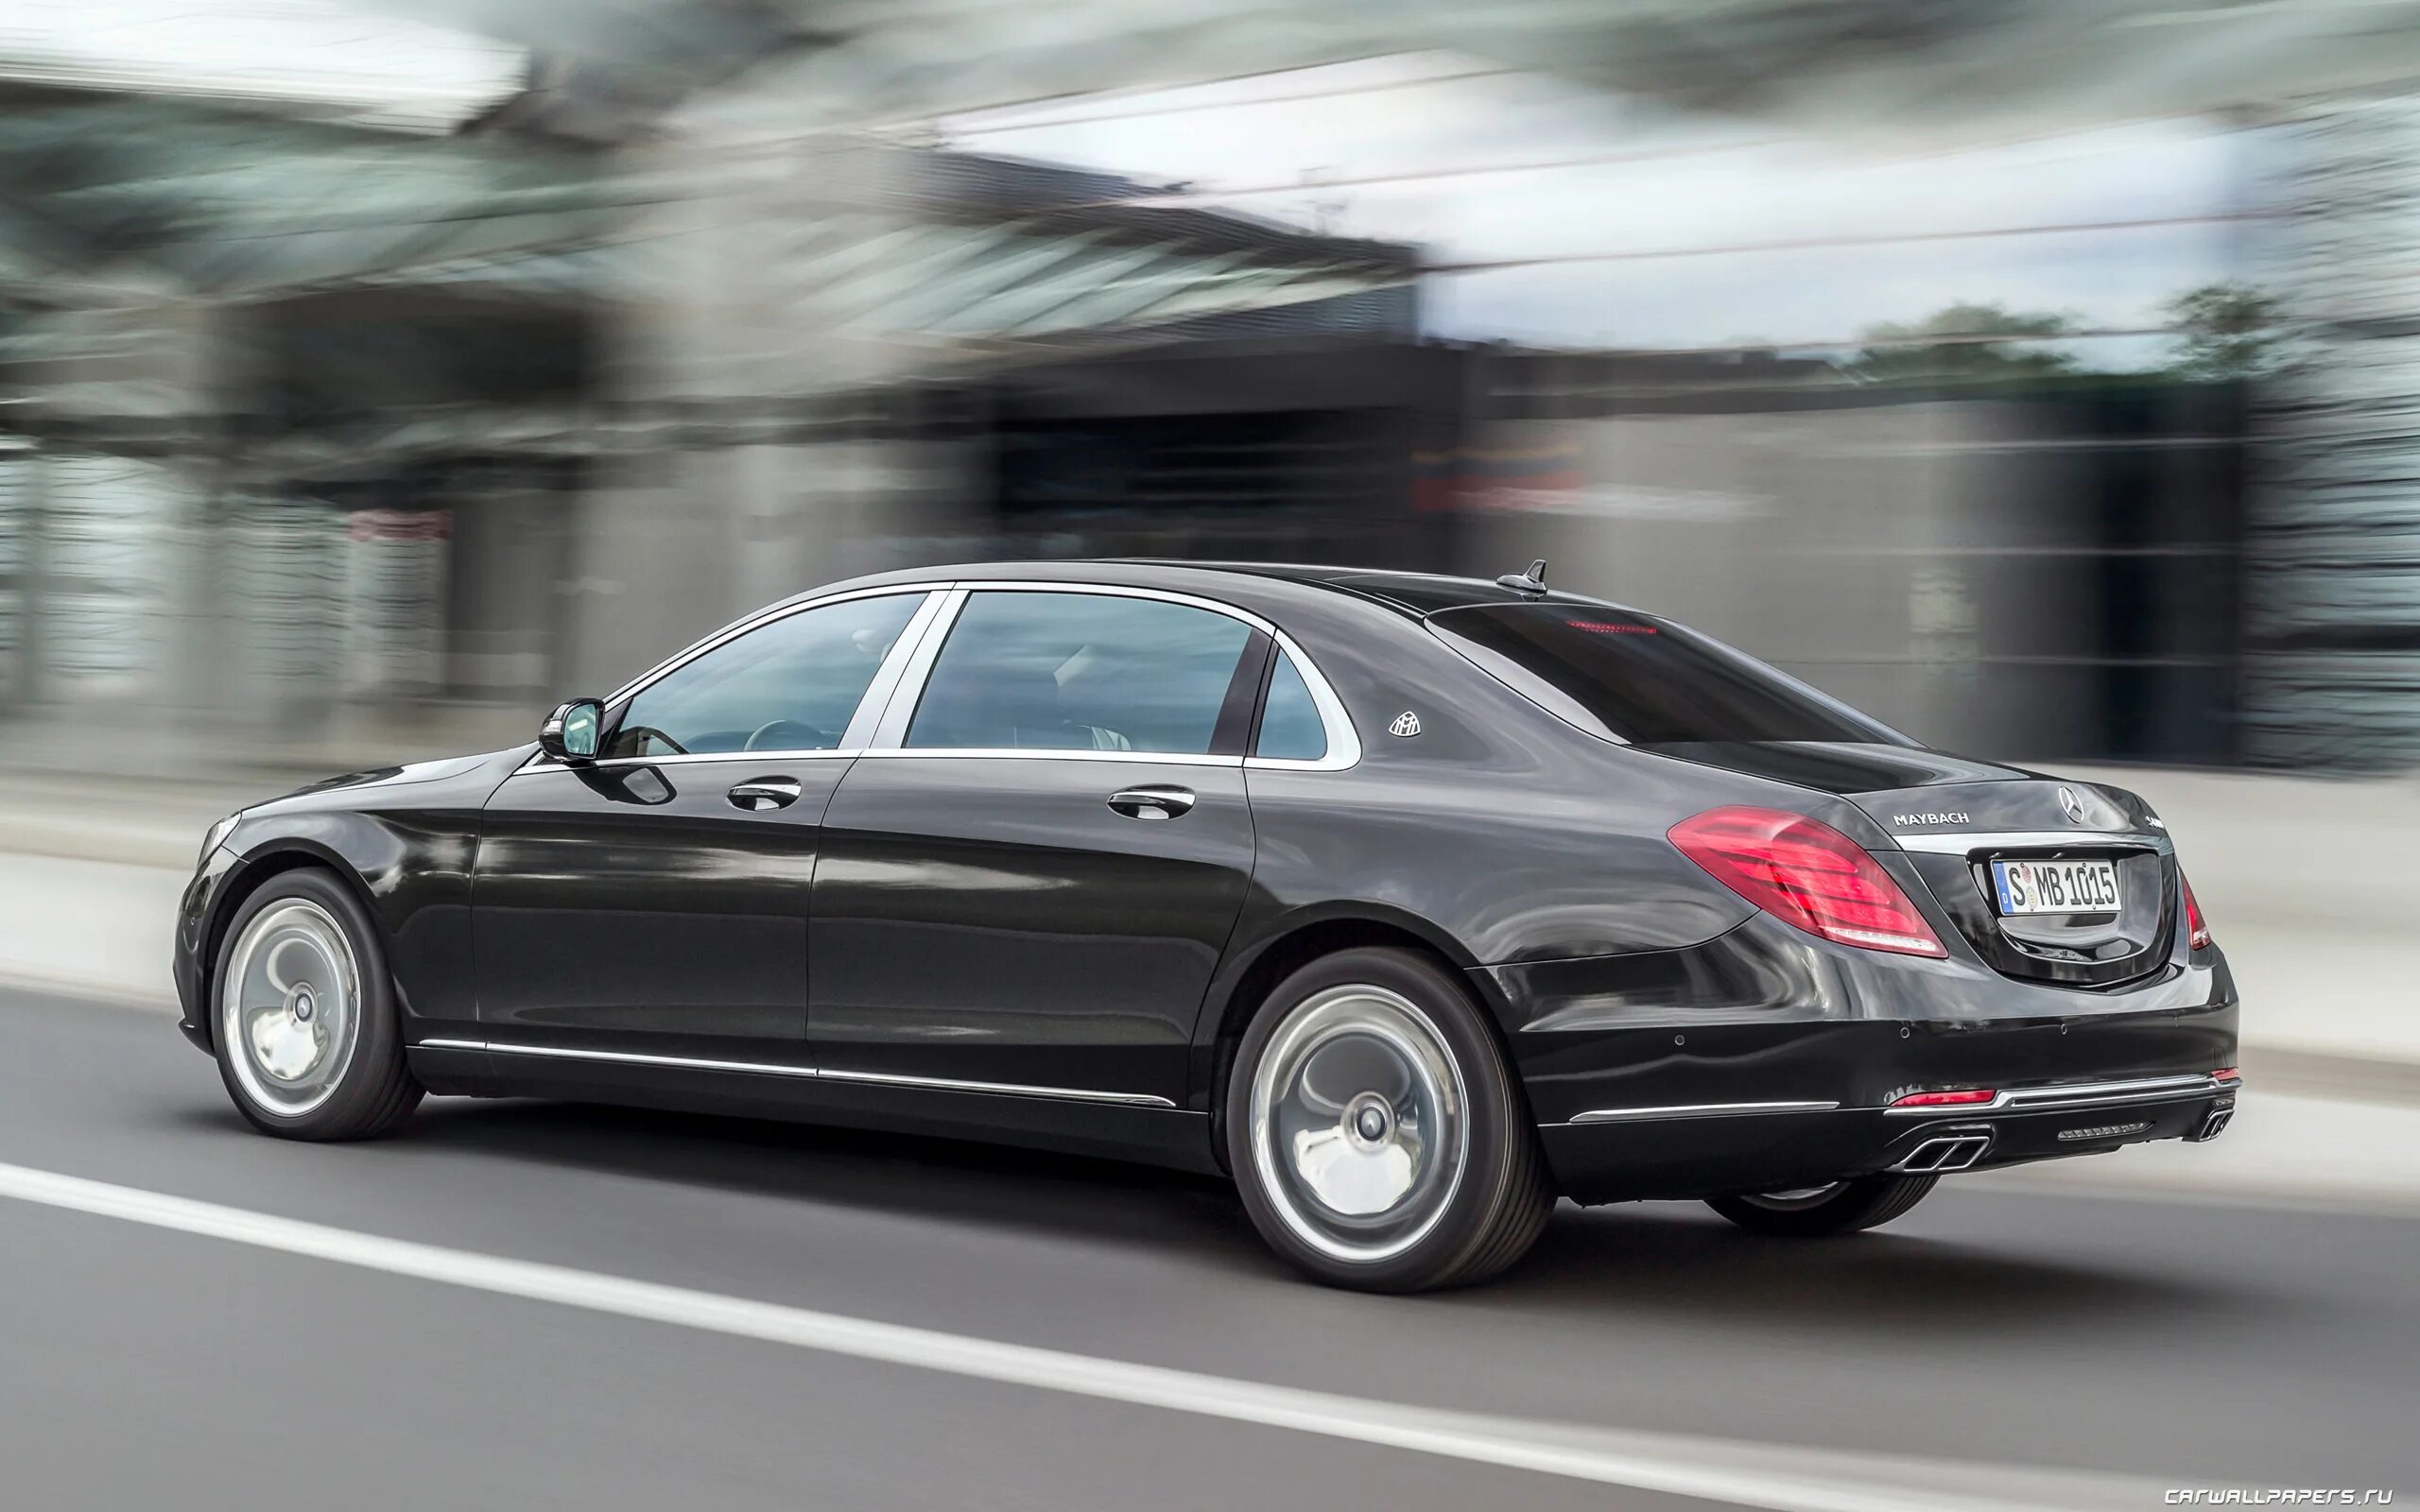 Мерседес s600. Mercedes Benz Maybach s600. Mercedes Benz s600 2015. 2015 Mercedes Benz Maybach s600. Майбах s 600 2015.